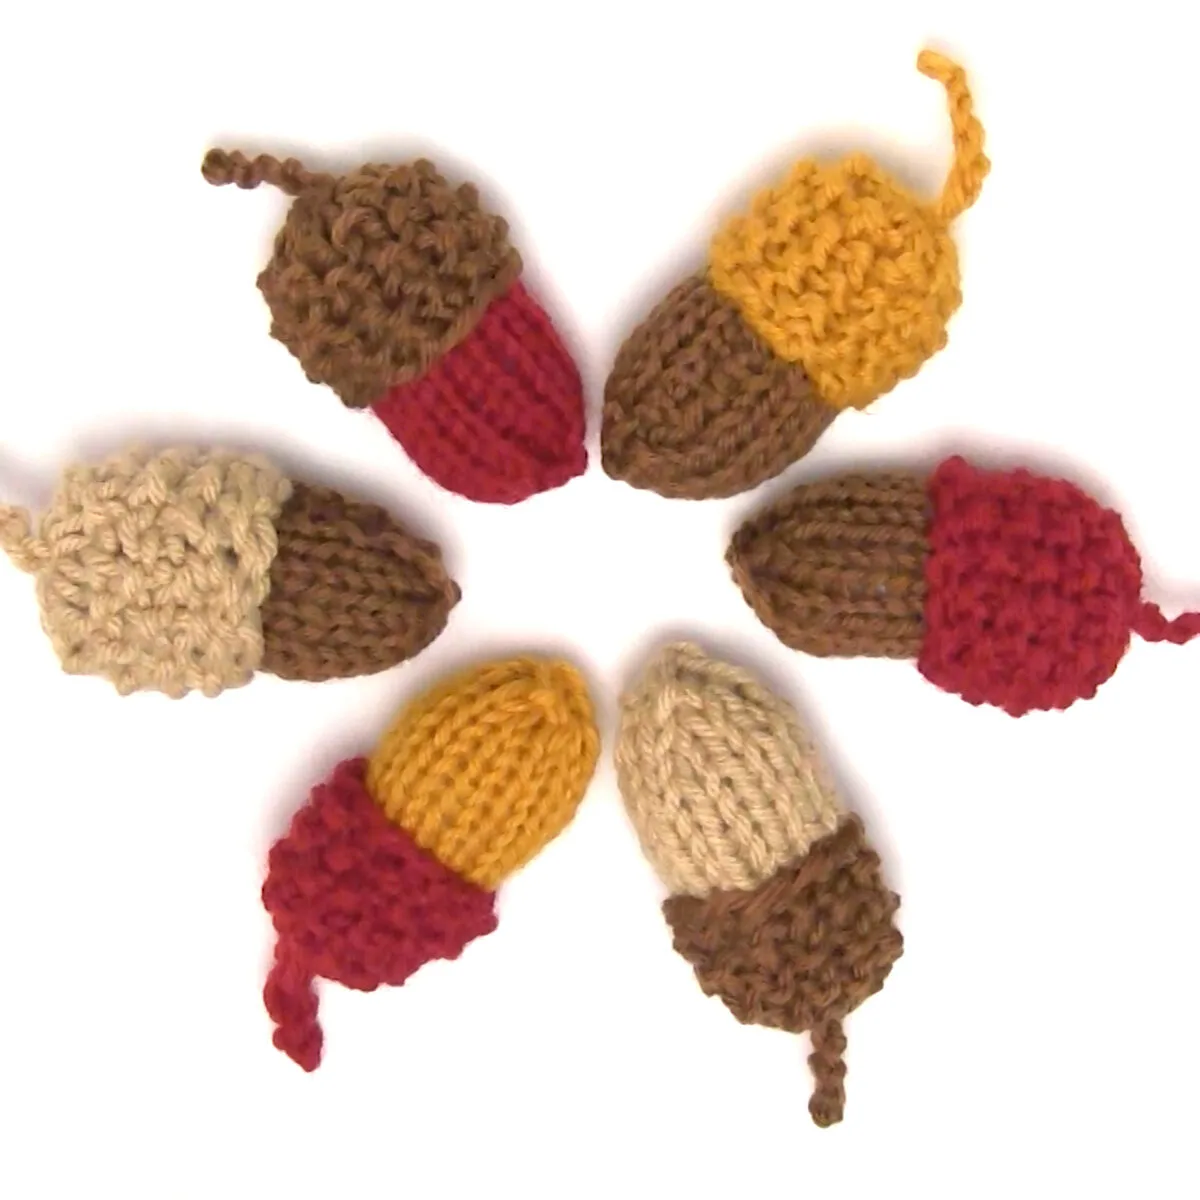 Group of knitted acorns arranged in a circle.